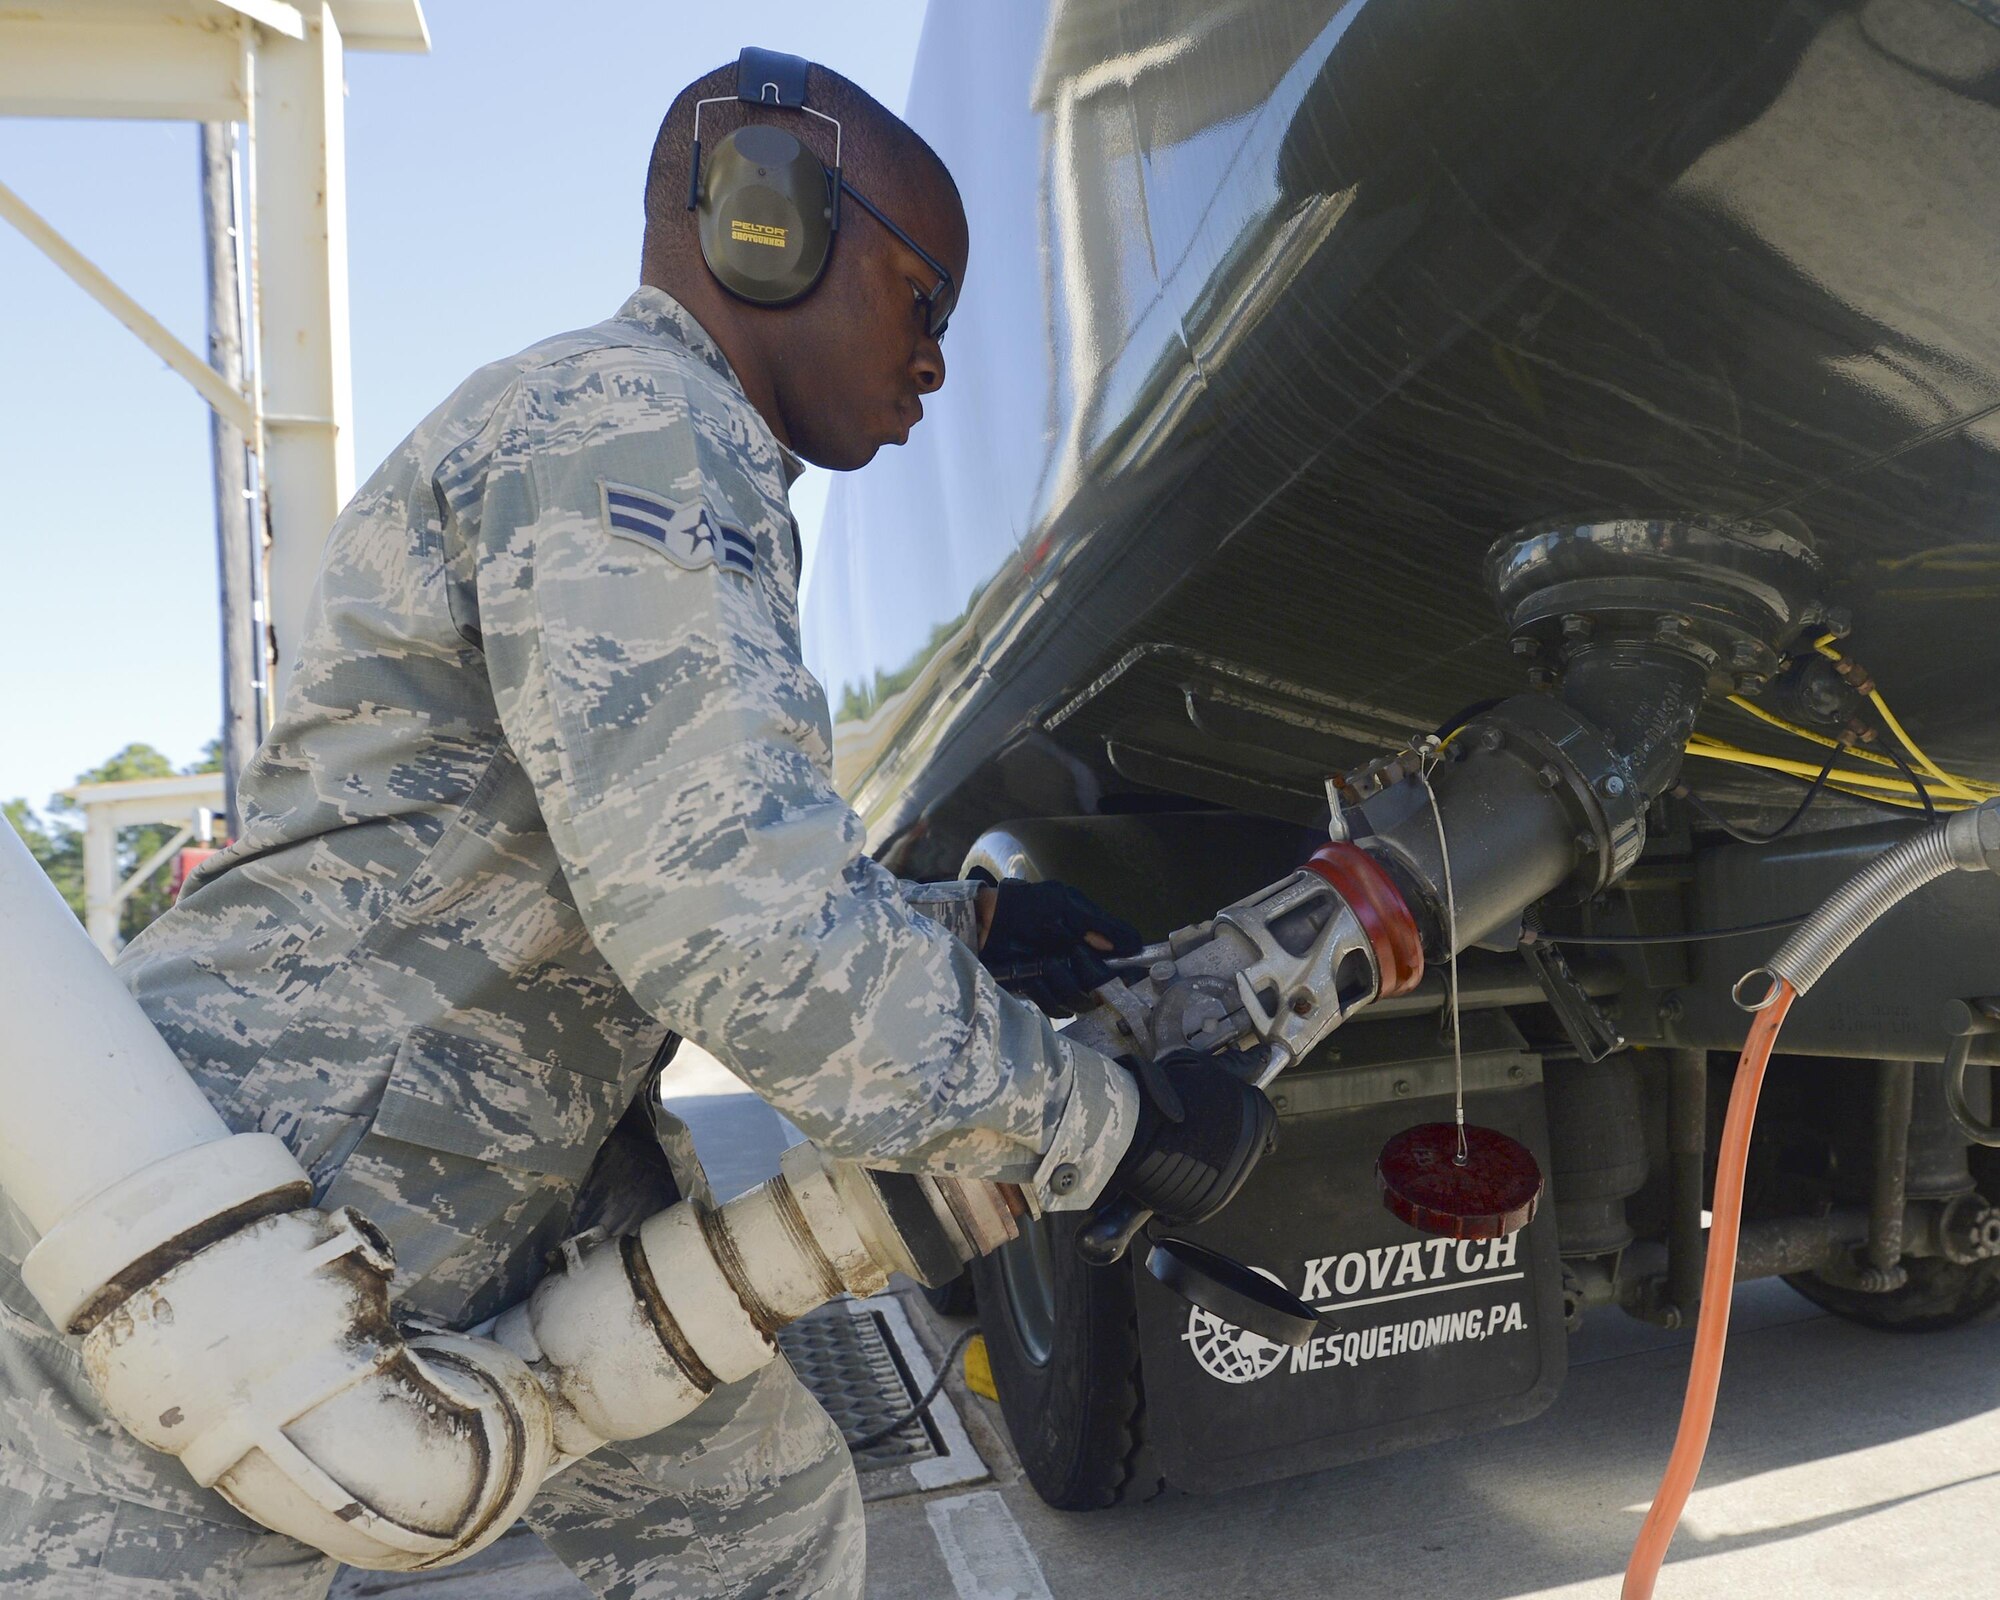 Airman 1st Class George Phillips, 325th Logistics Readiness Squadron fuels distribution technician, attaches a refueling hose to a fuel truck at Tyndall Air Force Base, April 5. The Fuels Management Flight of the 325th LRS supplies fuel to the entire base and supports the flying mission by fueling every aircraft that comes on station. (U.S. Air Force photo by Airman 1st Class Cody R. Miller/Released)